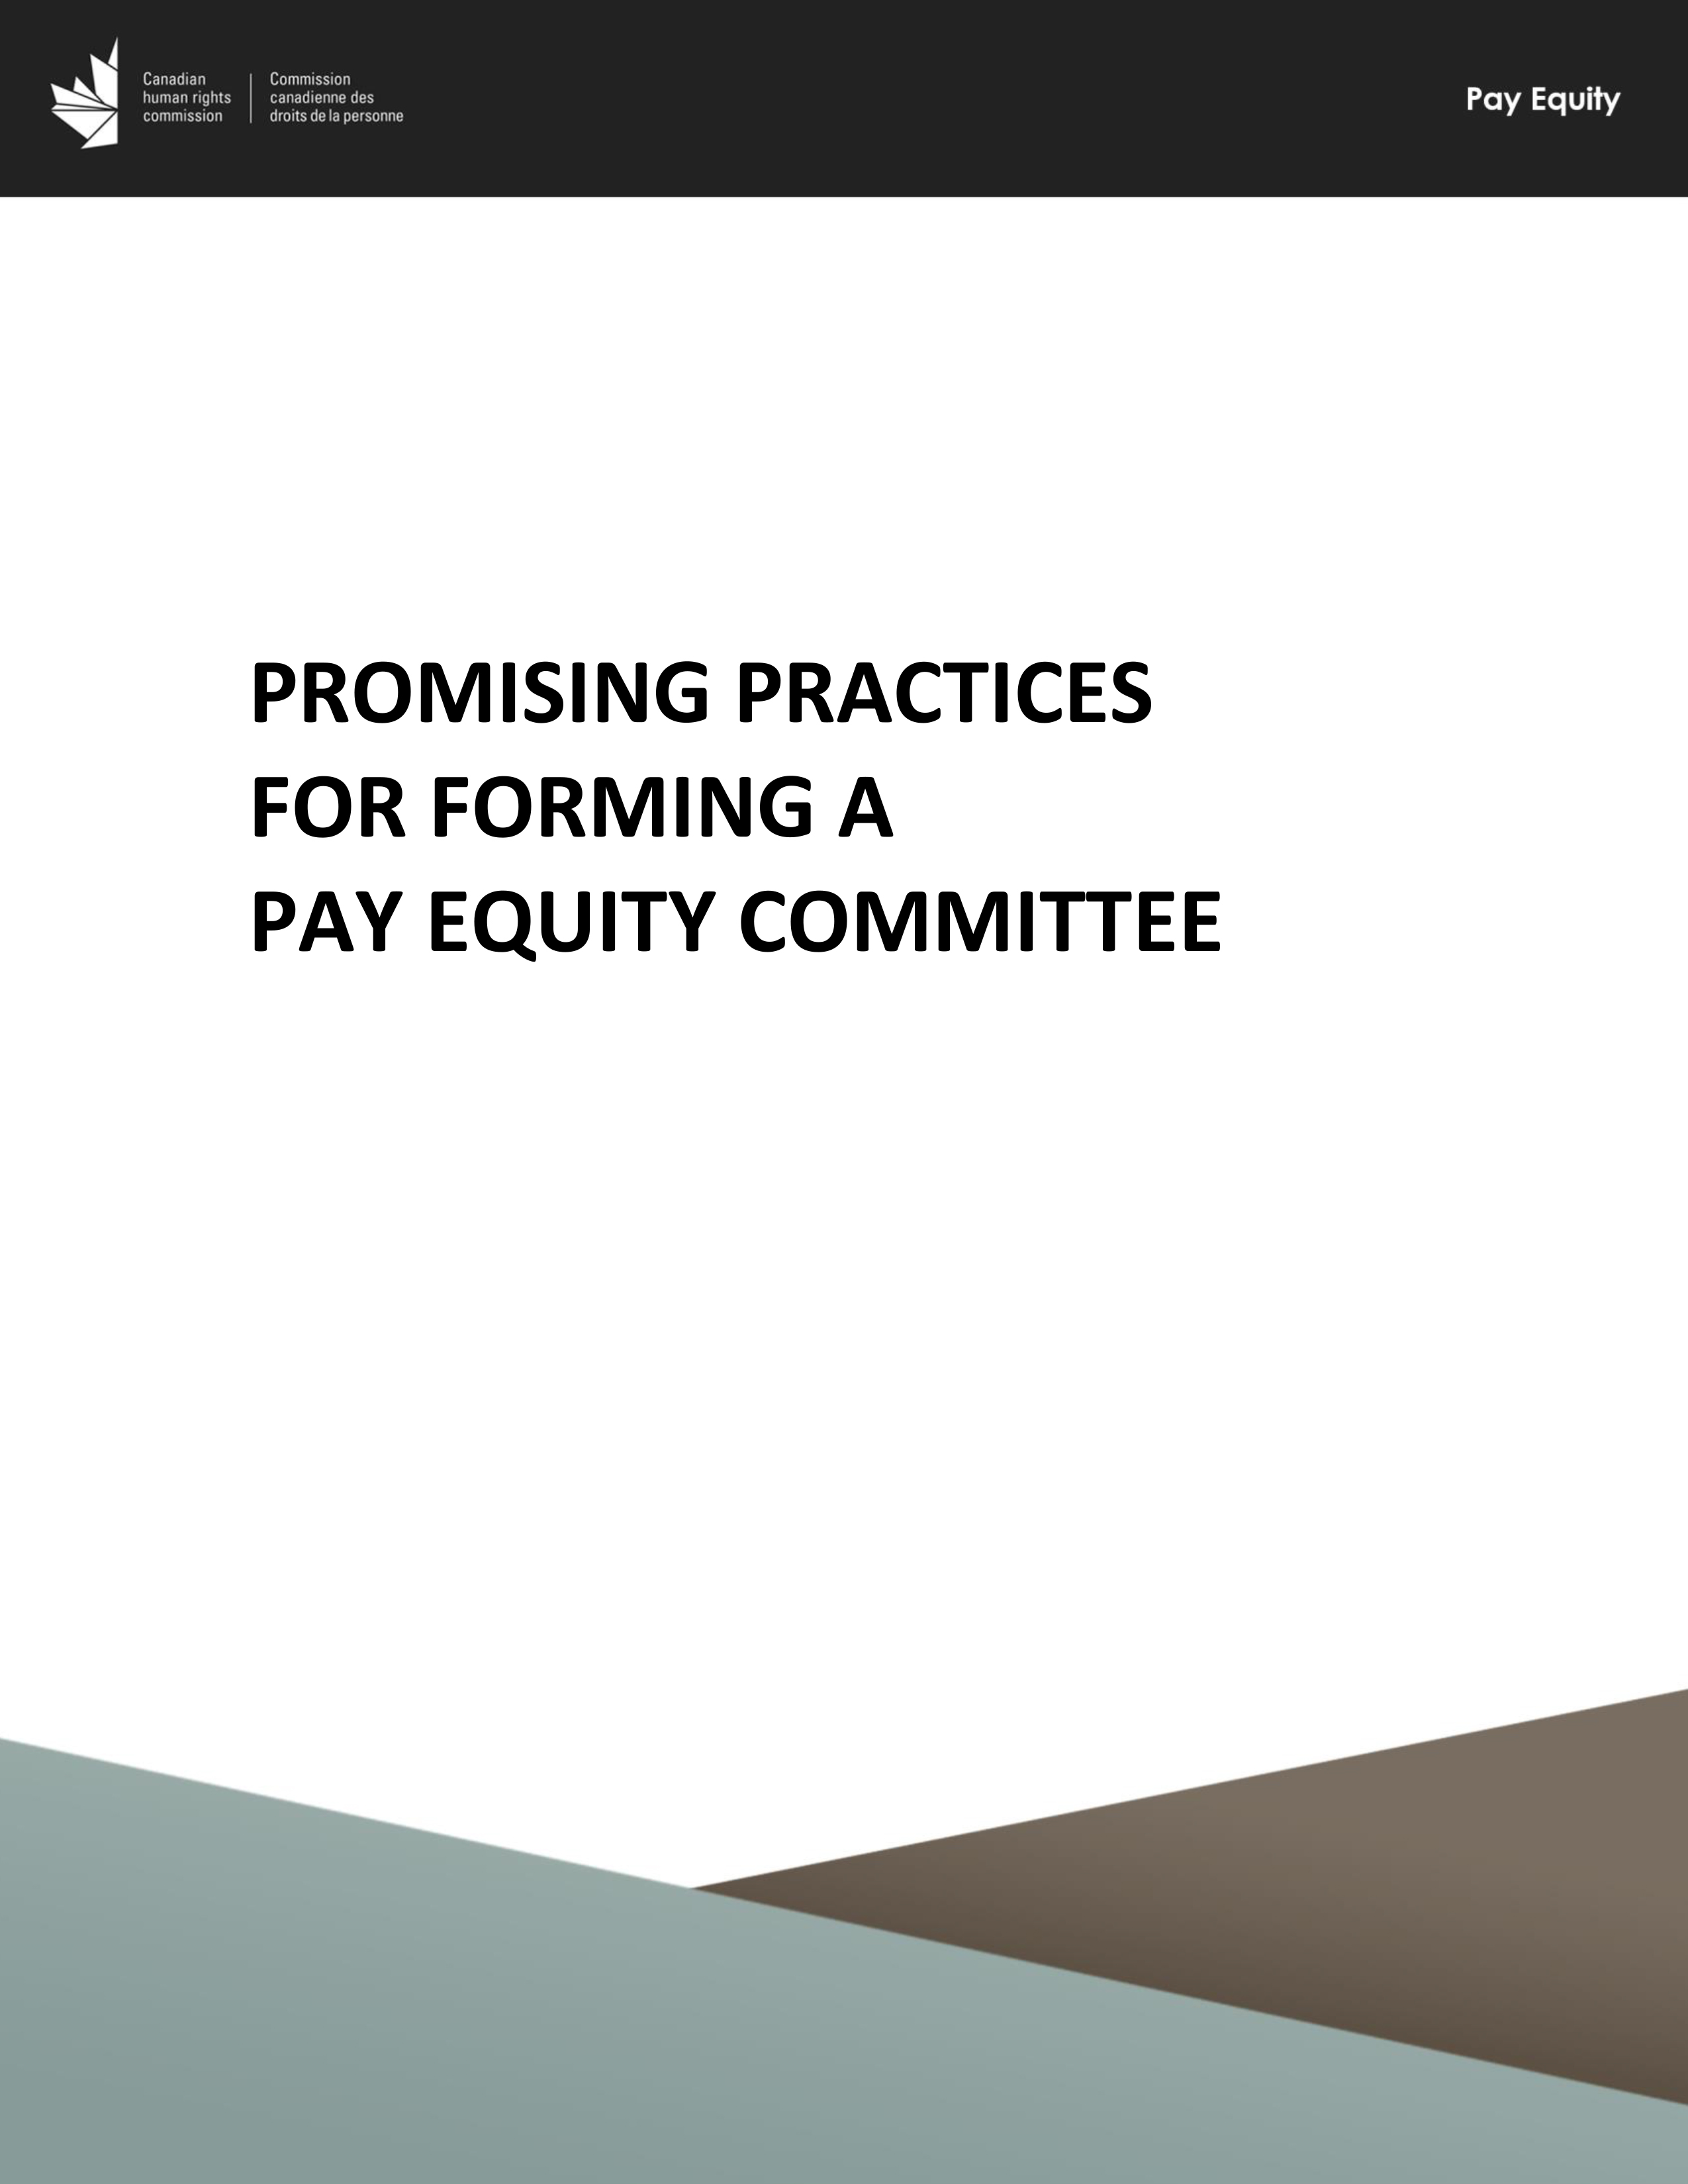 Promising practices for forming a pay equity committee